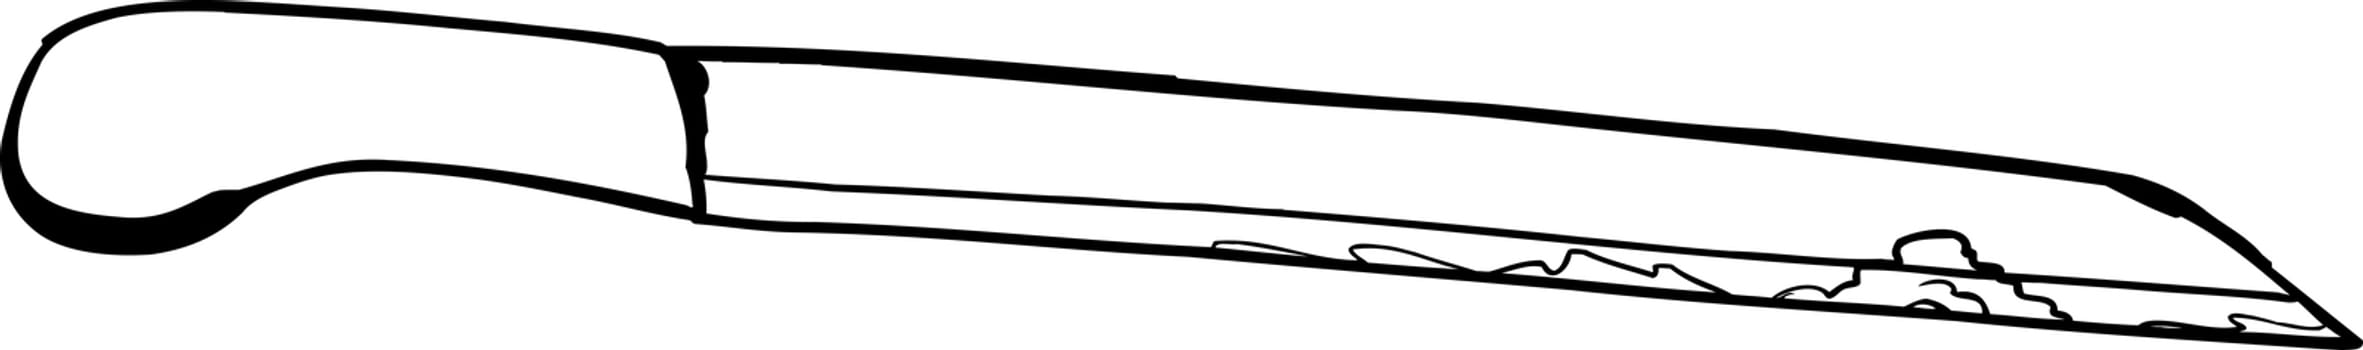 Outlined bloody bread knife over white background